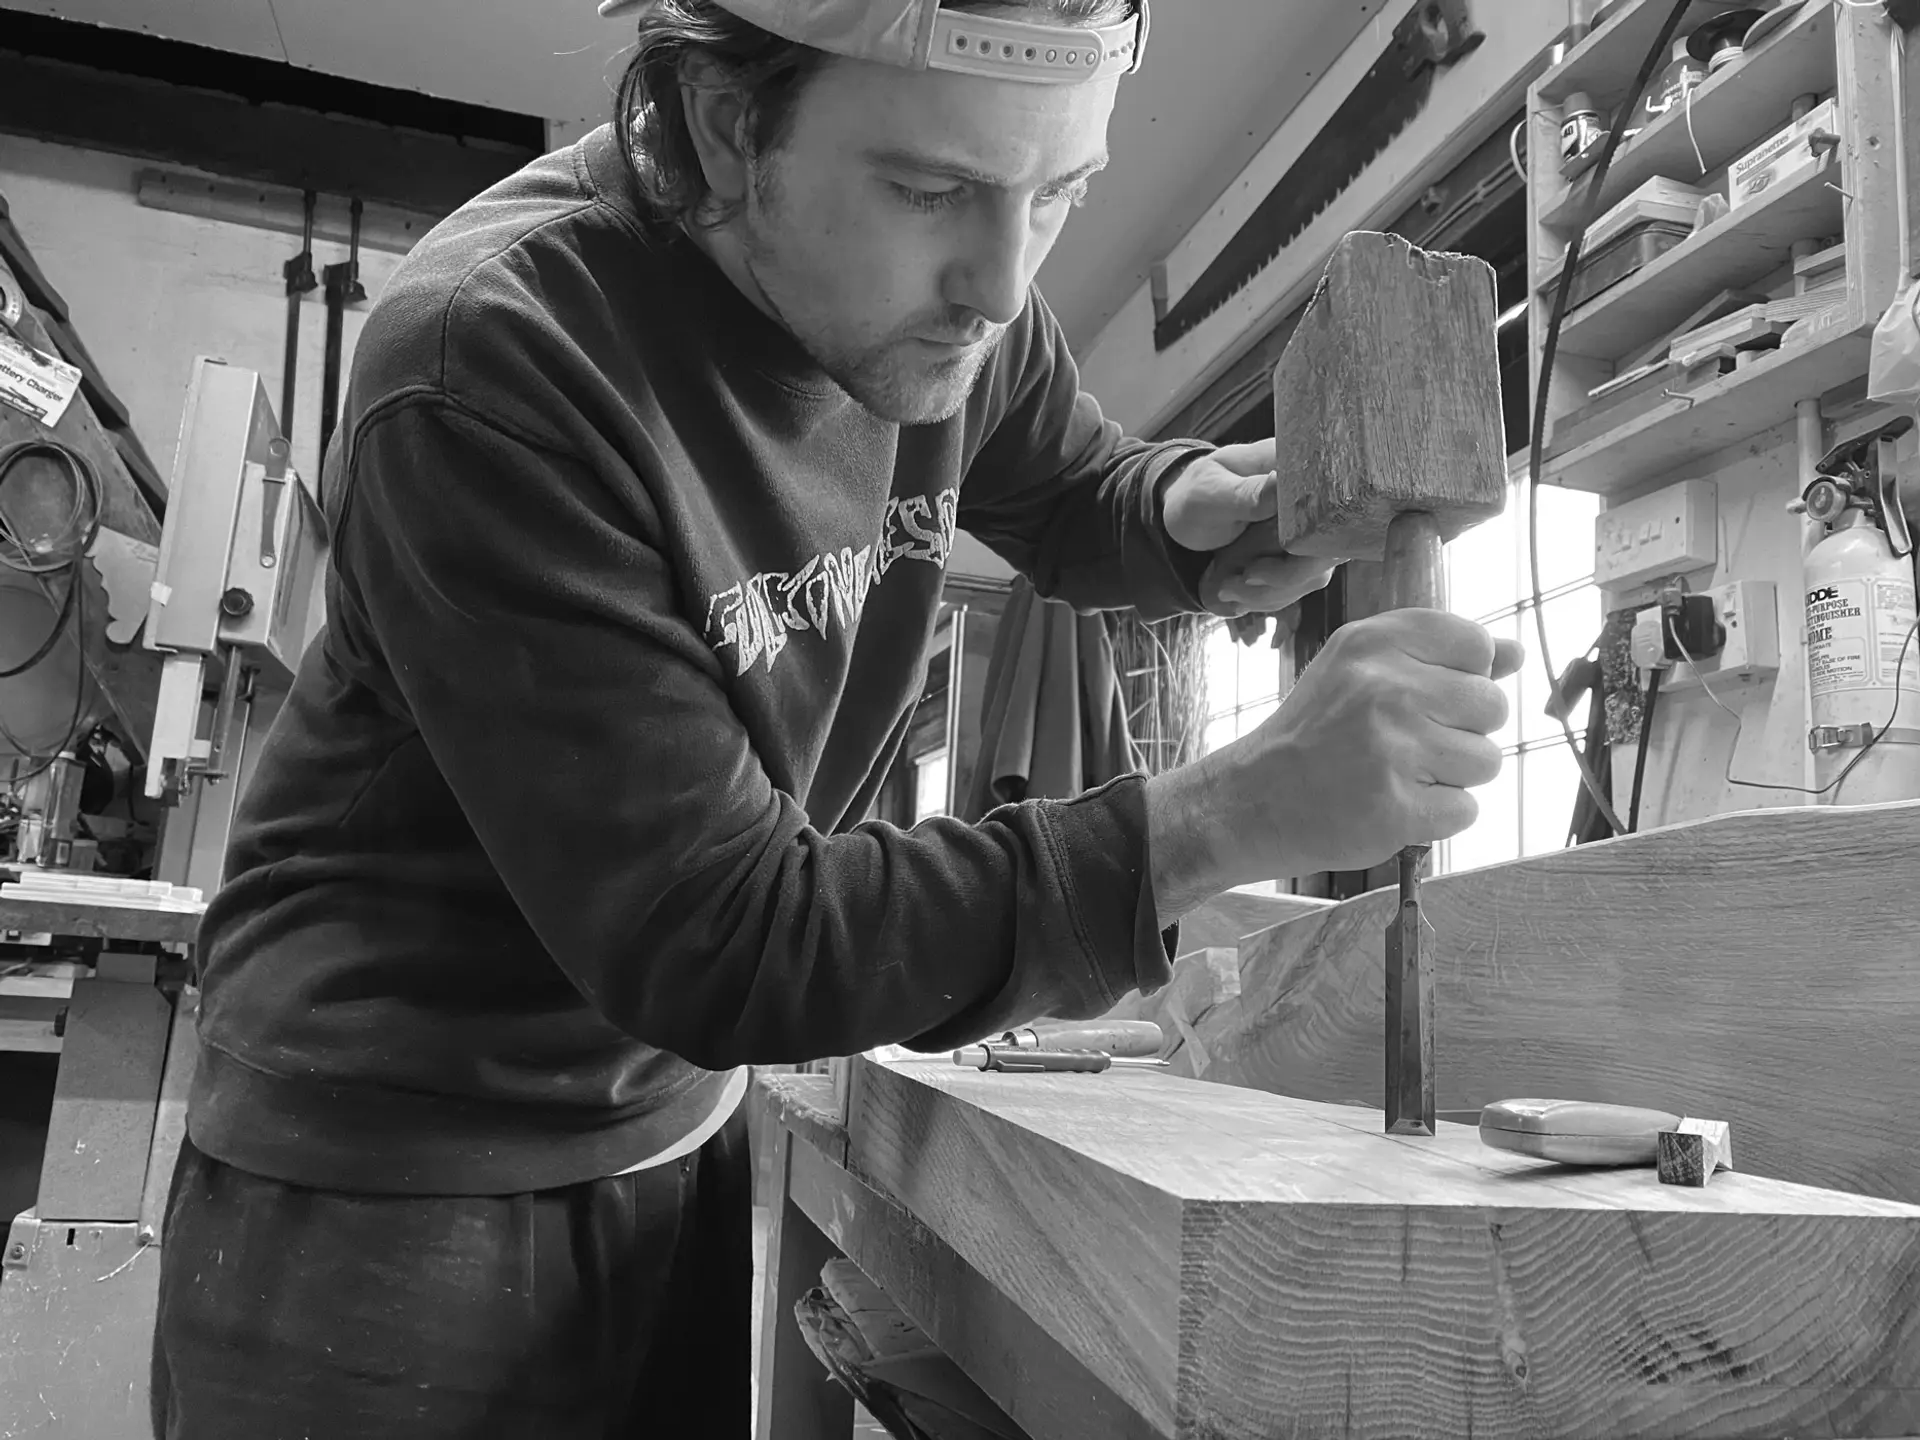 Man in his twenties, with a baseball cap on back to front, holds a wooden mallet and tool and works on a smooth, thick plank of oak wood. He is inside a workshop.